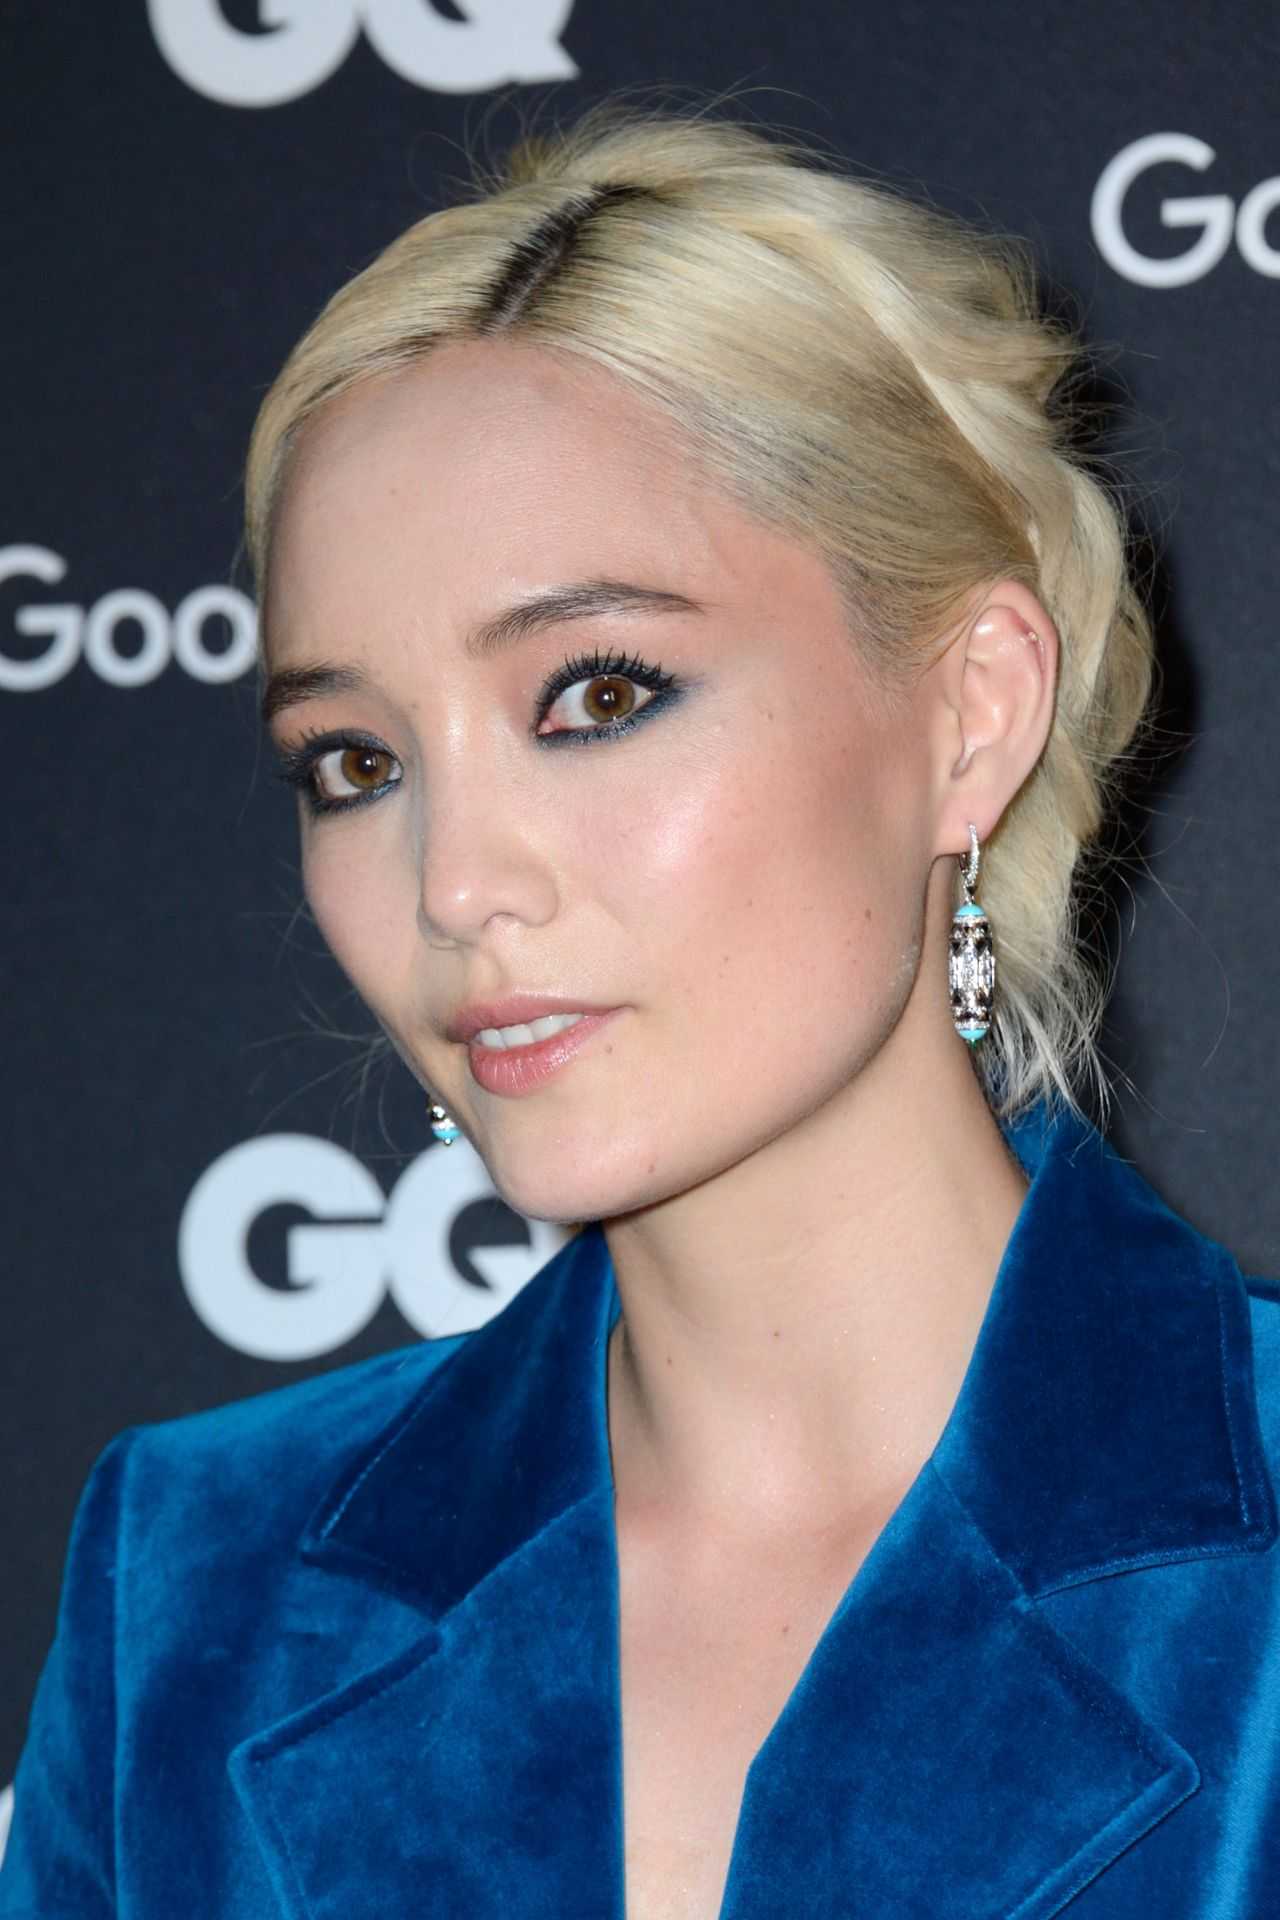 70+ Hot Pictures Of Pom Klementieff Who Plays Mantis In Marvel Cinematic Universe 222